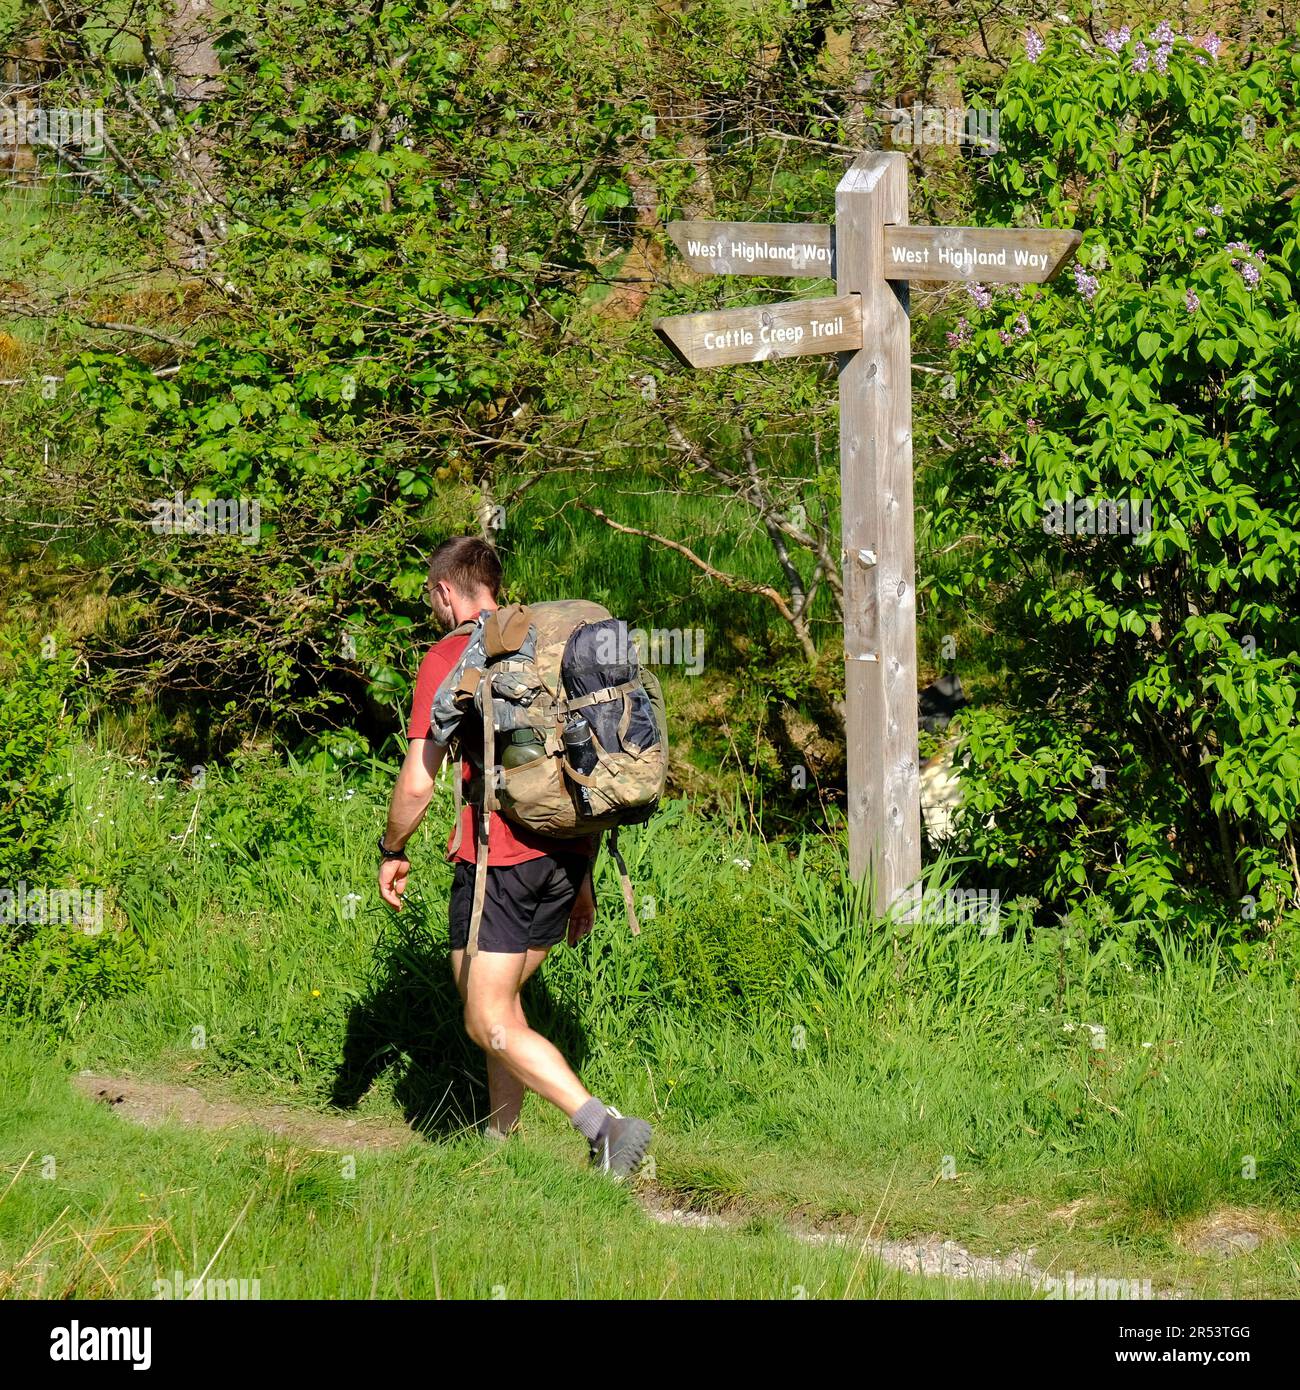 Walker passing a Fingerpost sign for the Cattle Creep Trail and the West Highland Way, Tyndrum, Scotland Stock Photo